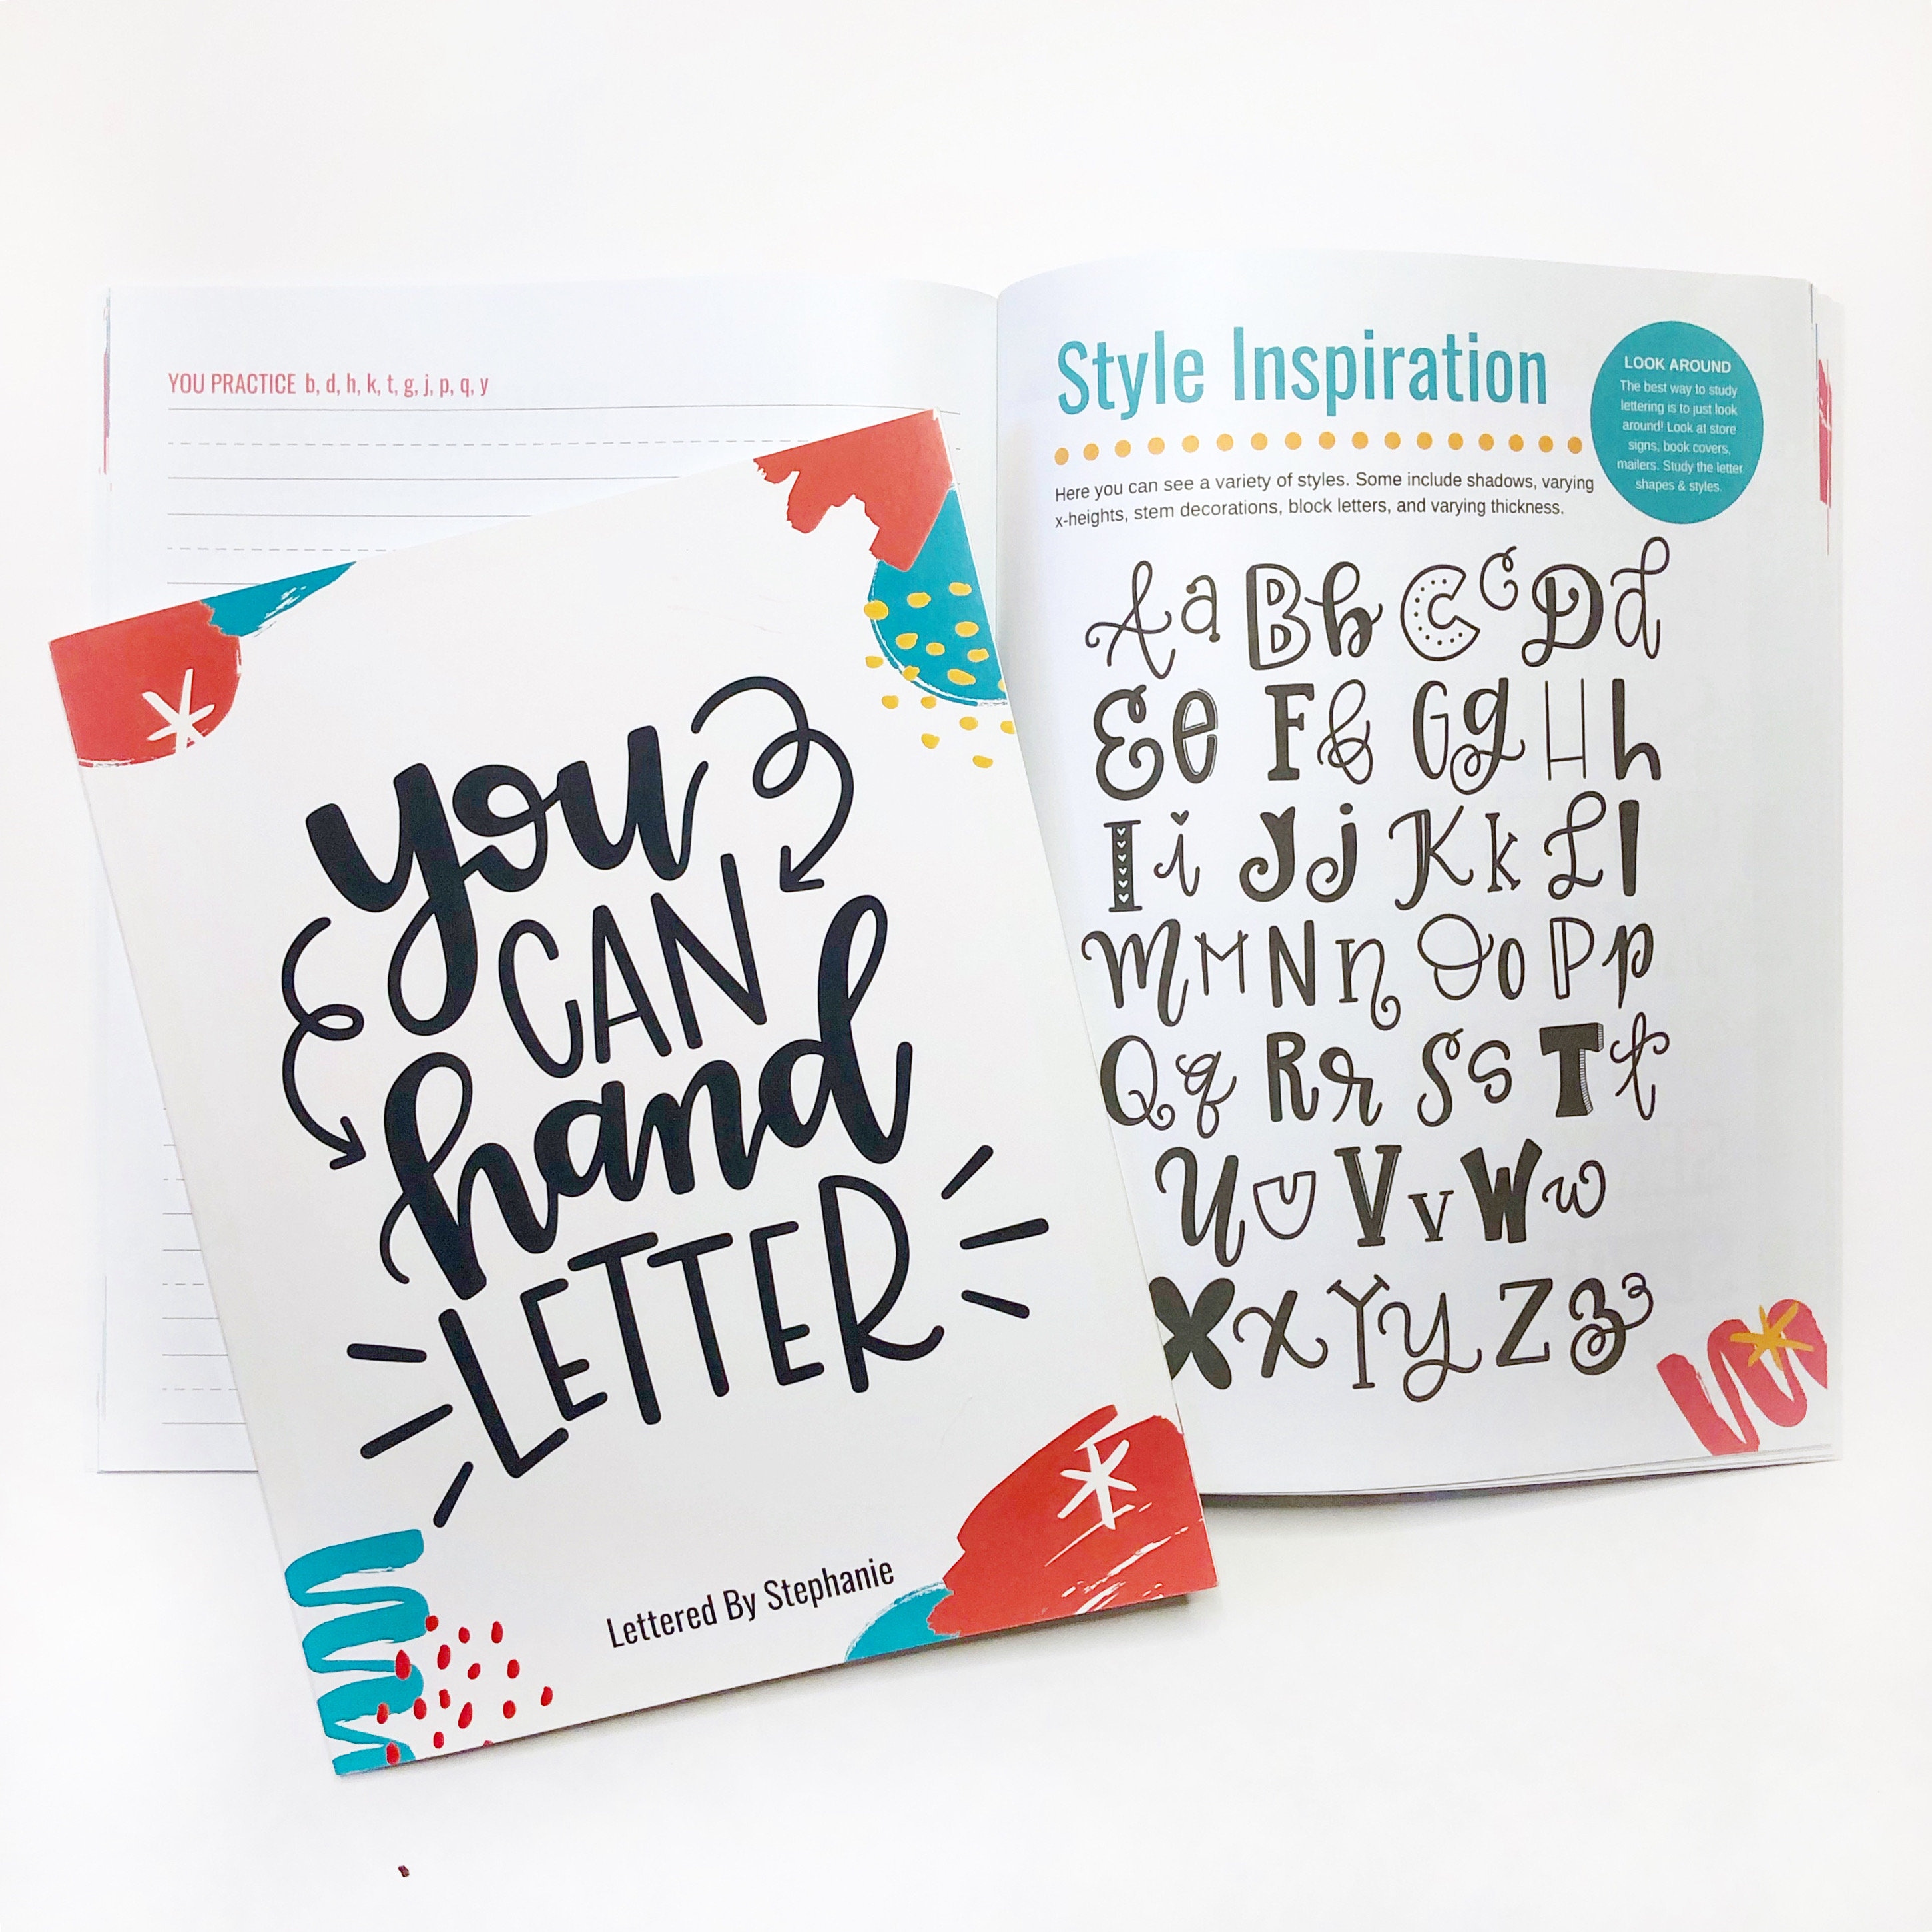 Brush Lettering Workbook: How to Writing in a Modern Calligraphy  Step-by-Step. A Brush Calligraphy Lettering Book for Improving Handwriting  Techniques (Calligraphy Workbooks useful for Adults, Teens and Kids) by  Samuel Typography Publishing